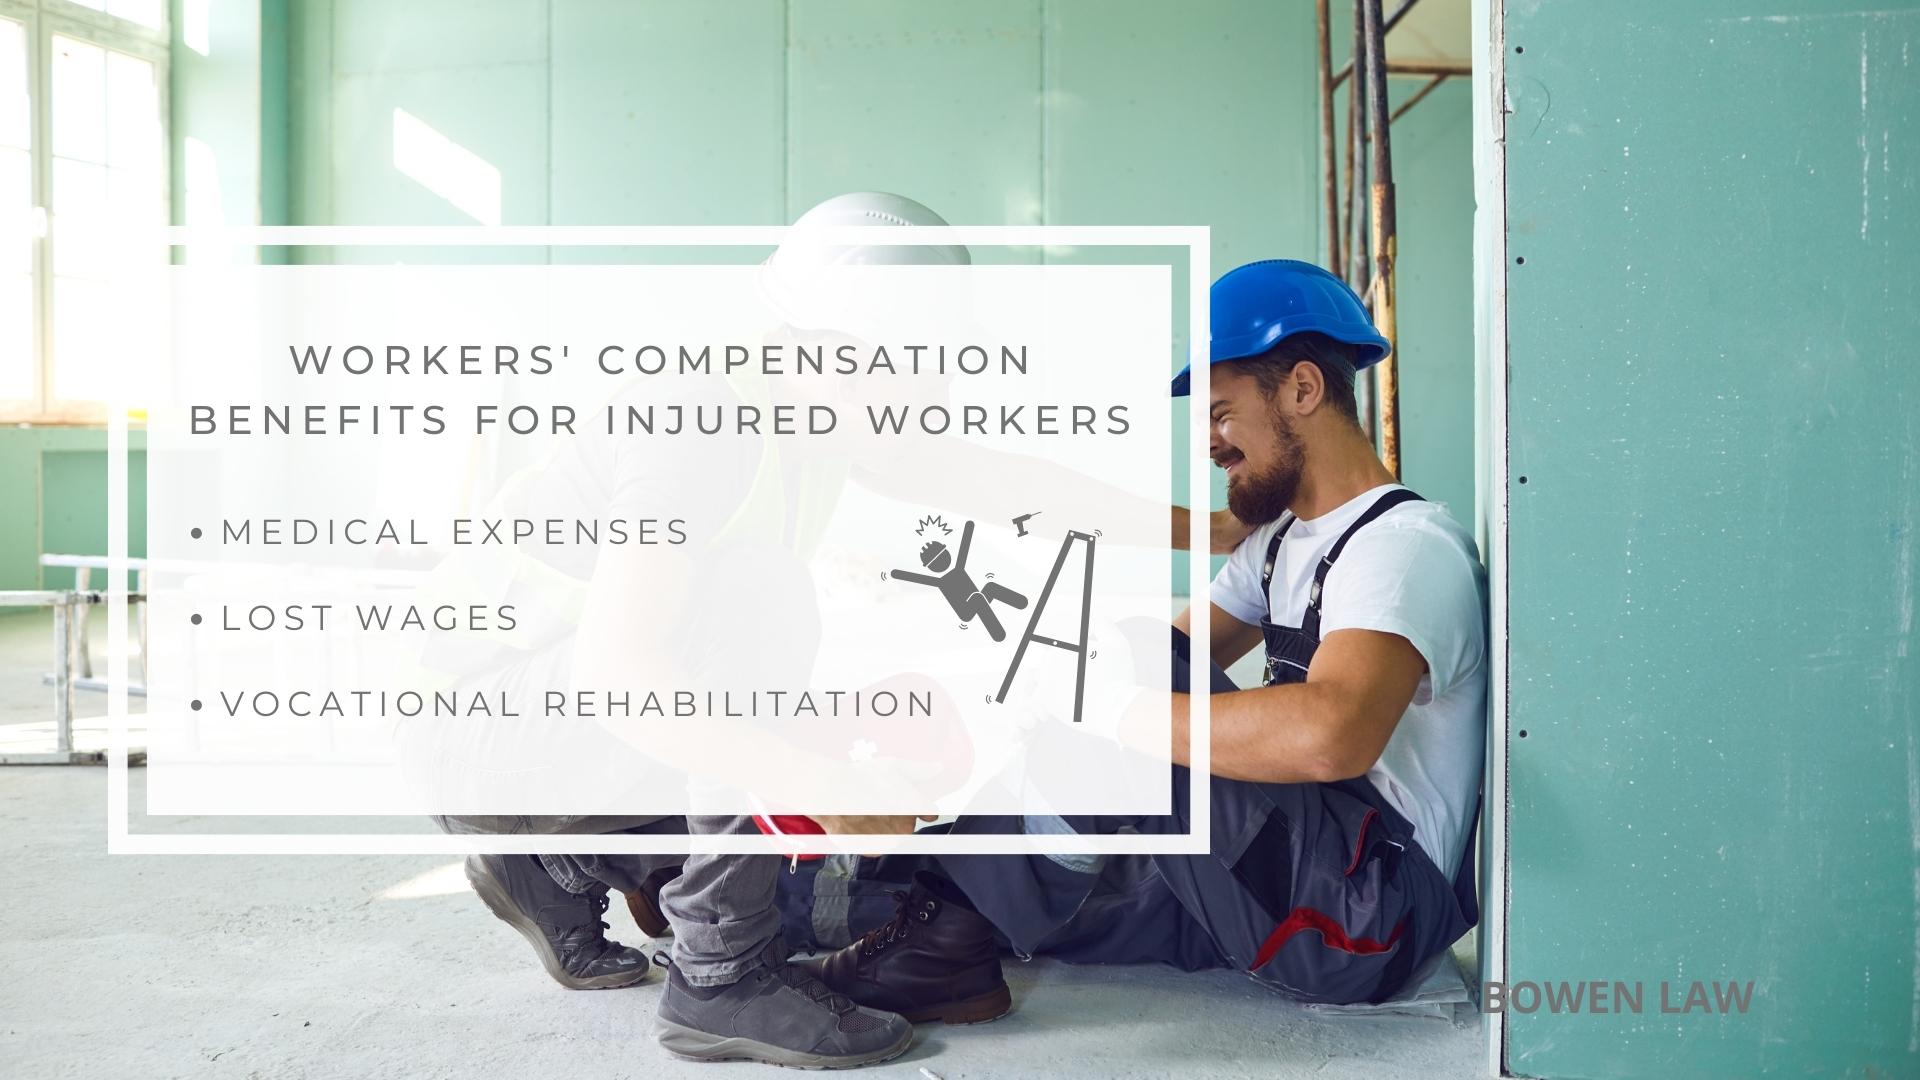 Infographic image of workers' compensation benefits for injured workers